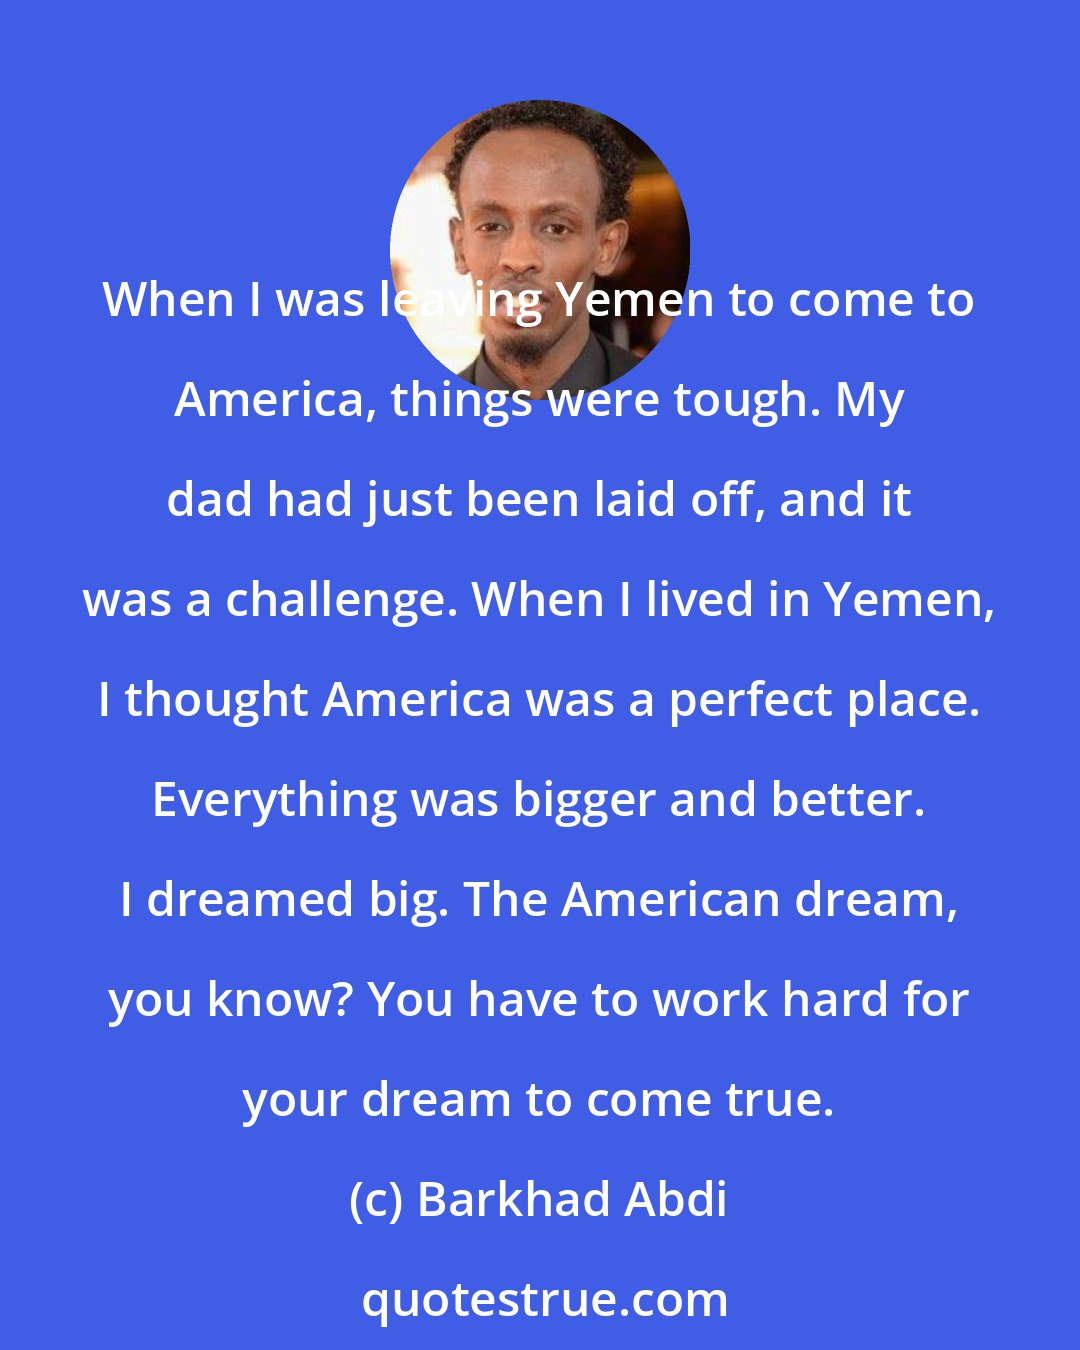 Barkhad Abdi: When I was leaving Yemen to come to America, things were tough. My dad had just been laid off, and it was a challenge. When I lived in Yemen, I thought America was a perfect place. Everything was bigger and better. I dreamed big. The American dream, you know? You have to work hard for your dream to come true.